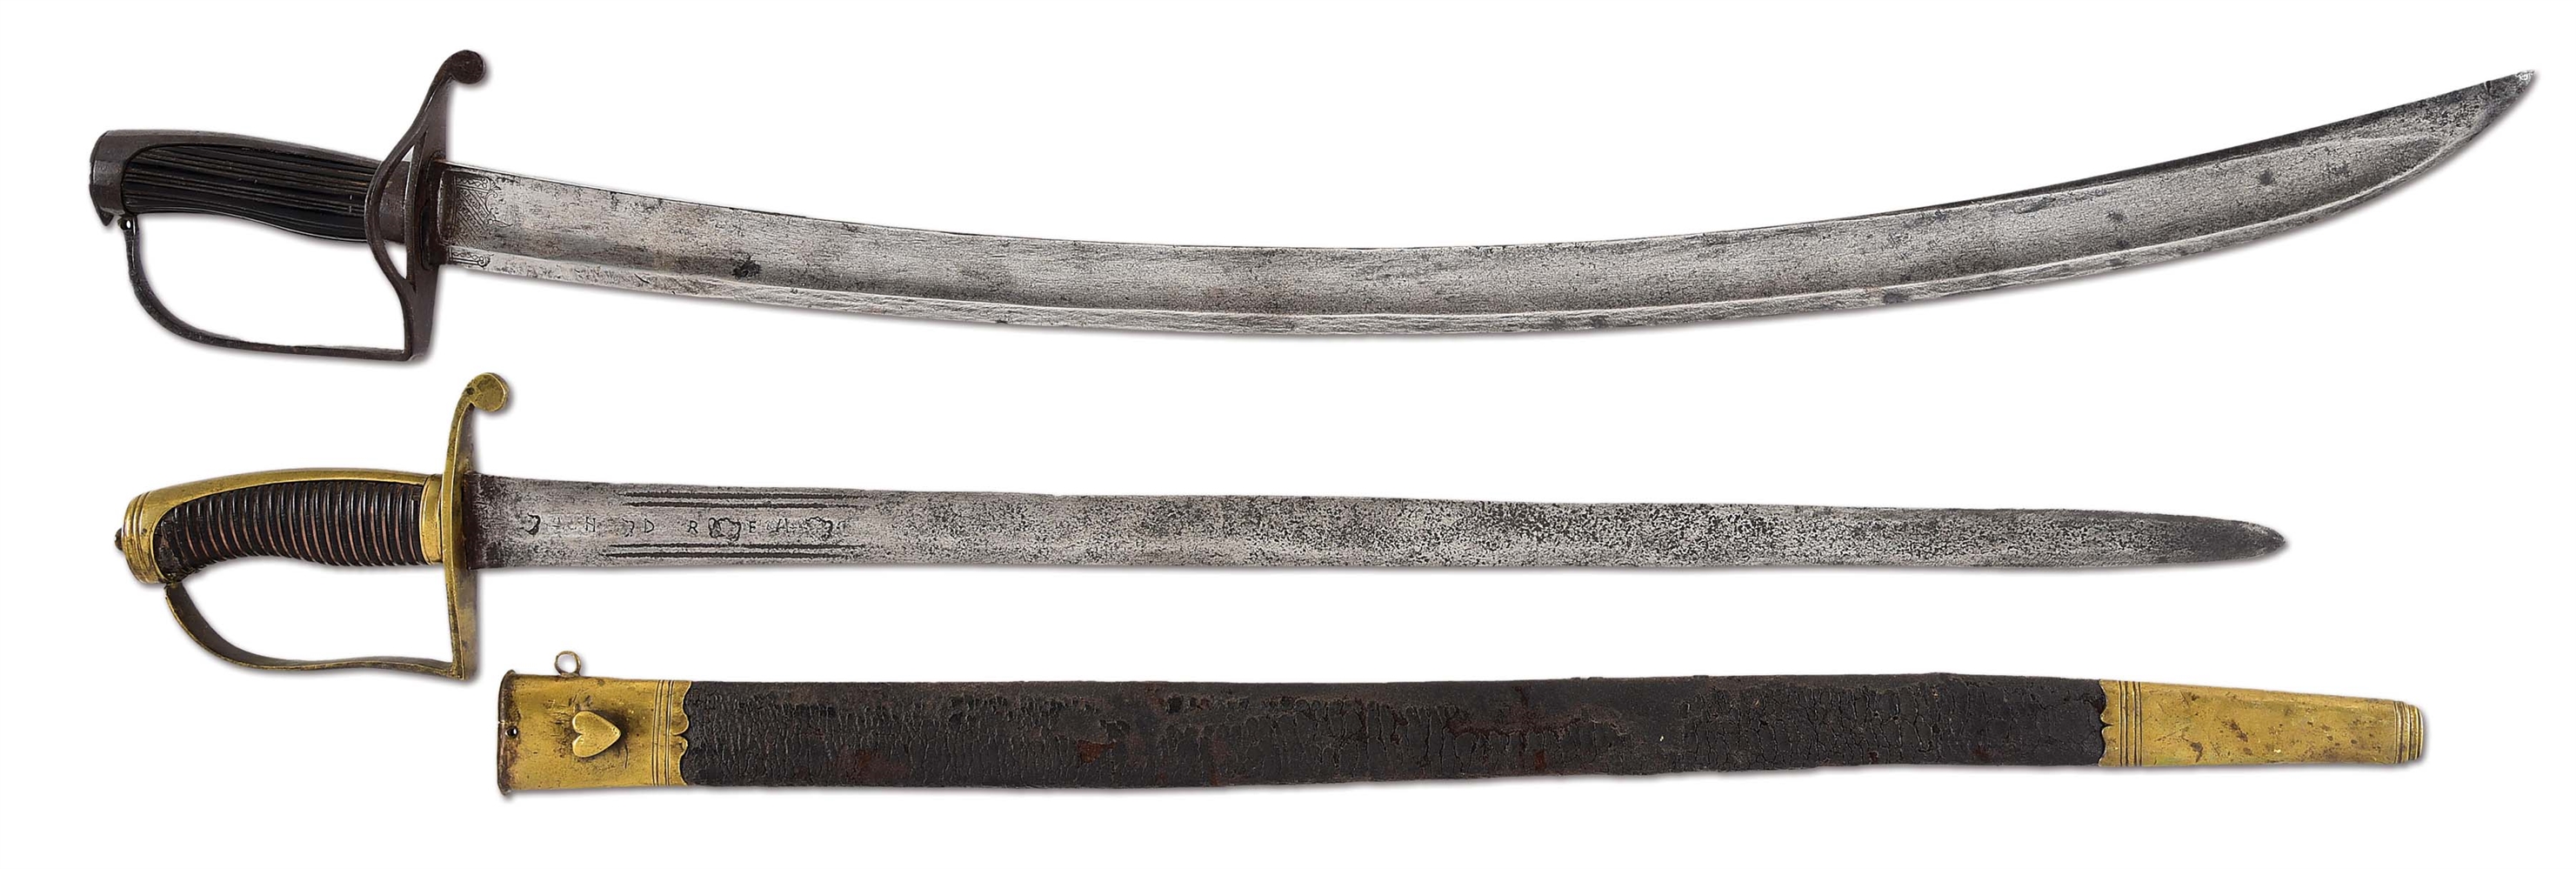 LOT OF 2: EARLY AMERICAN SHORT SWORDS.